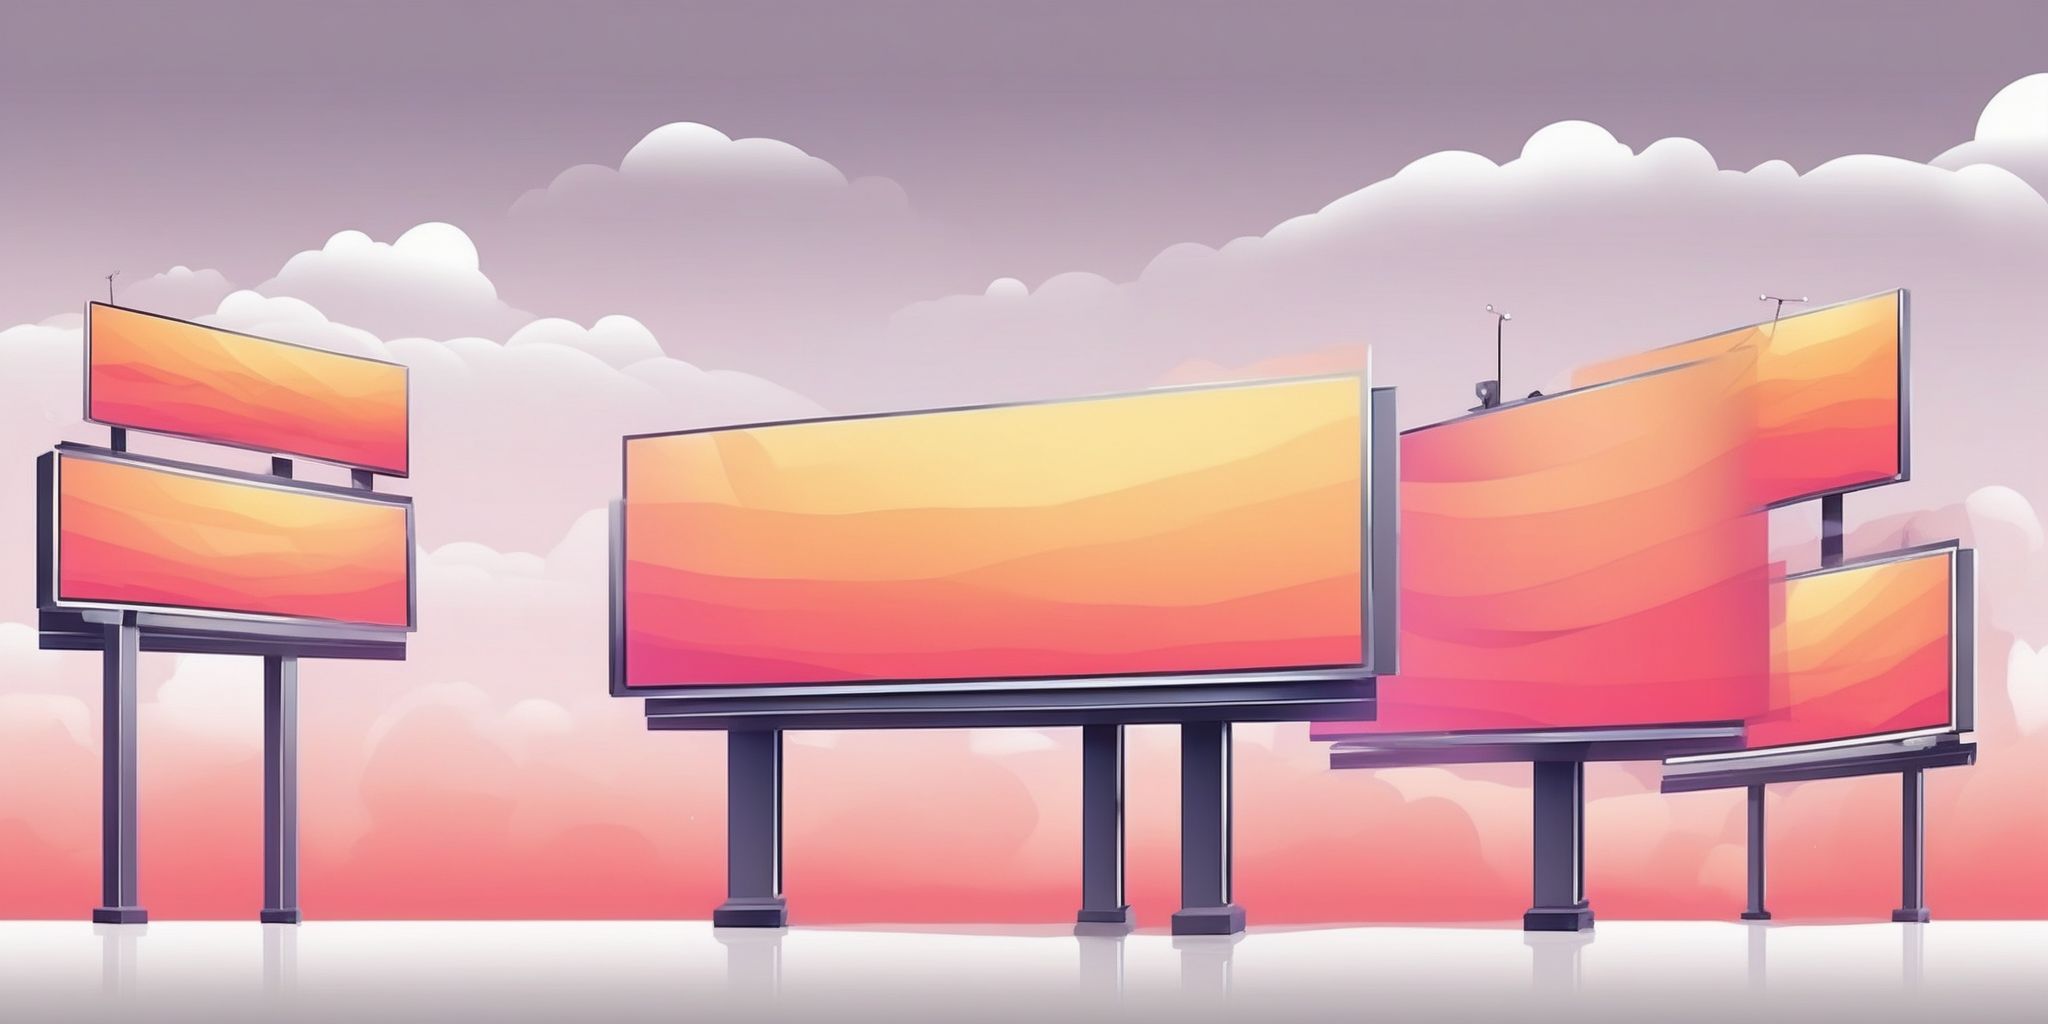 Billboard in illustration style with gradients and white background